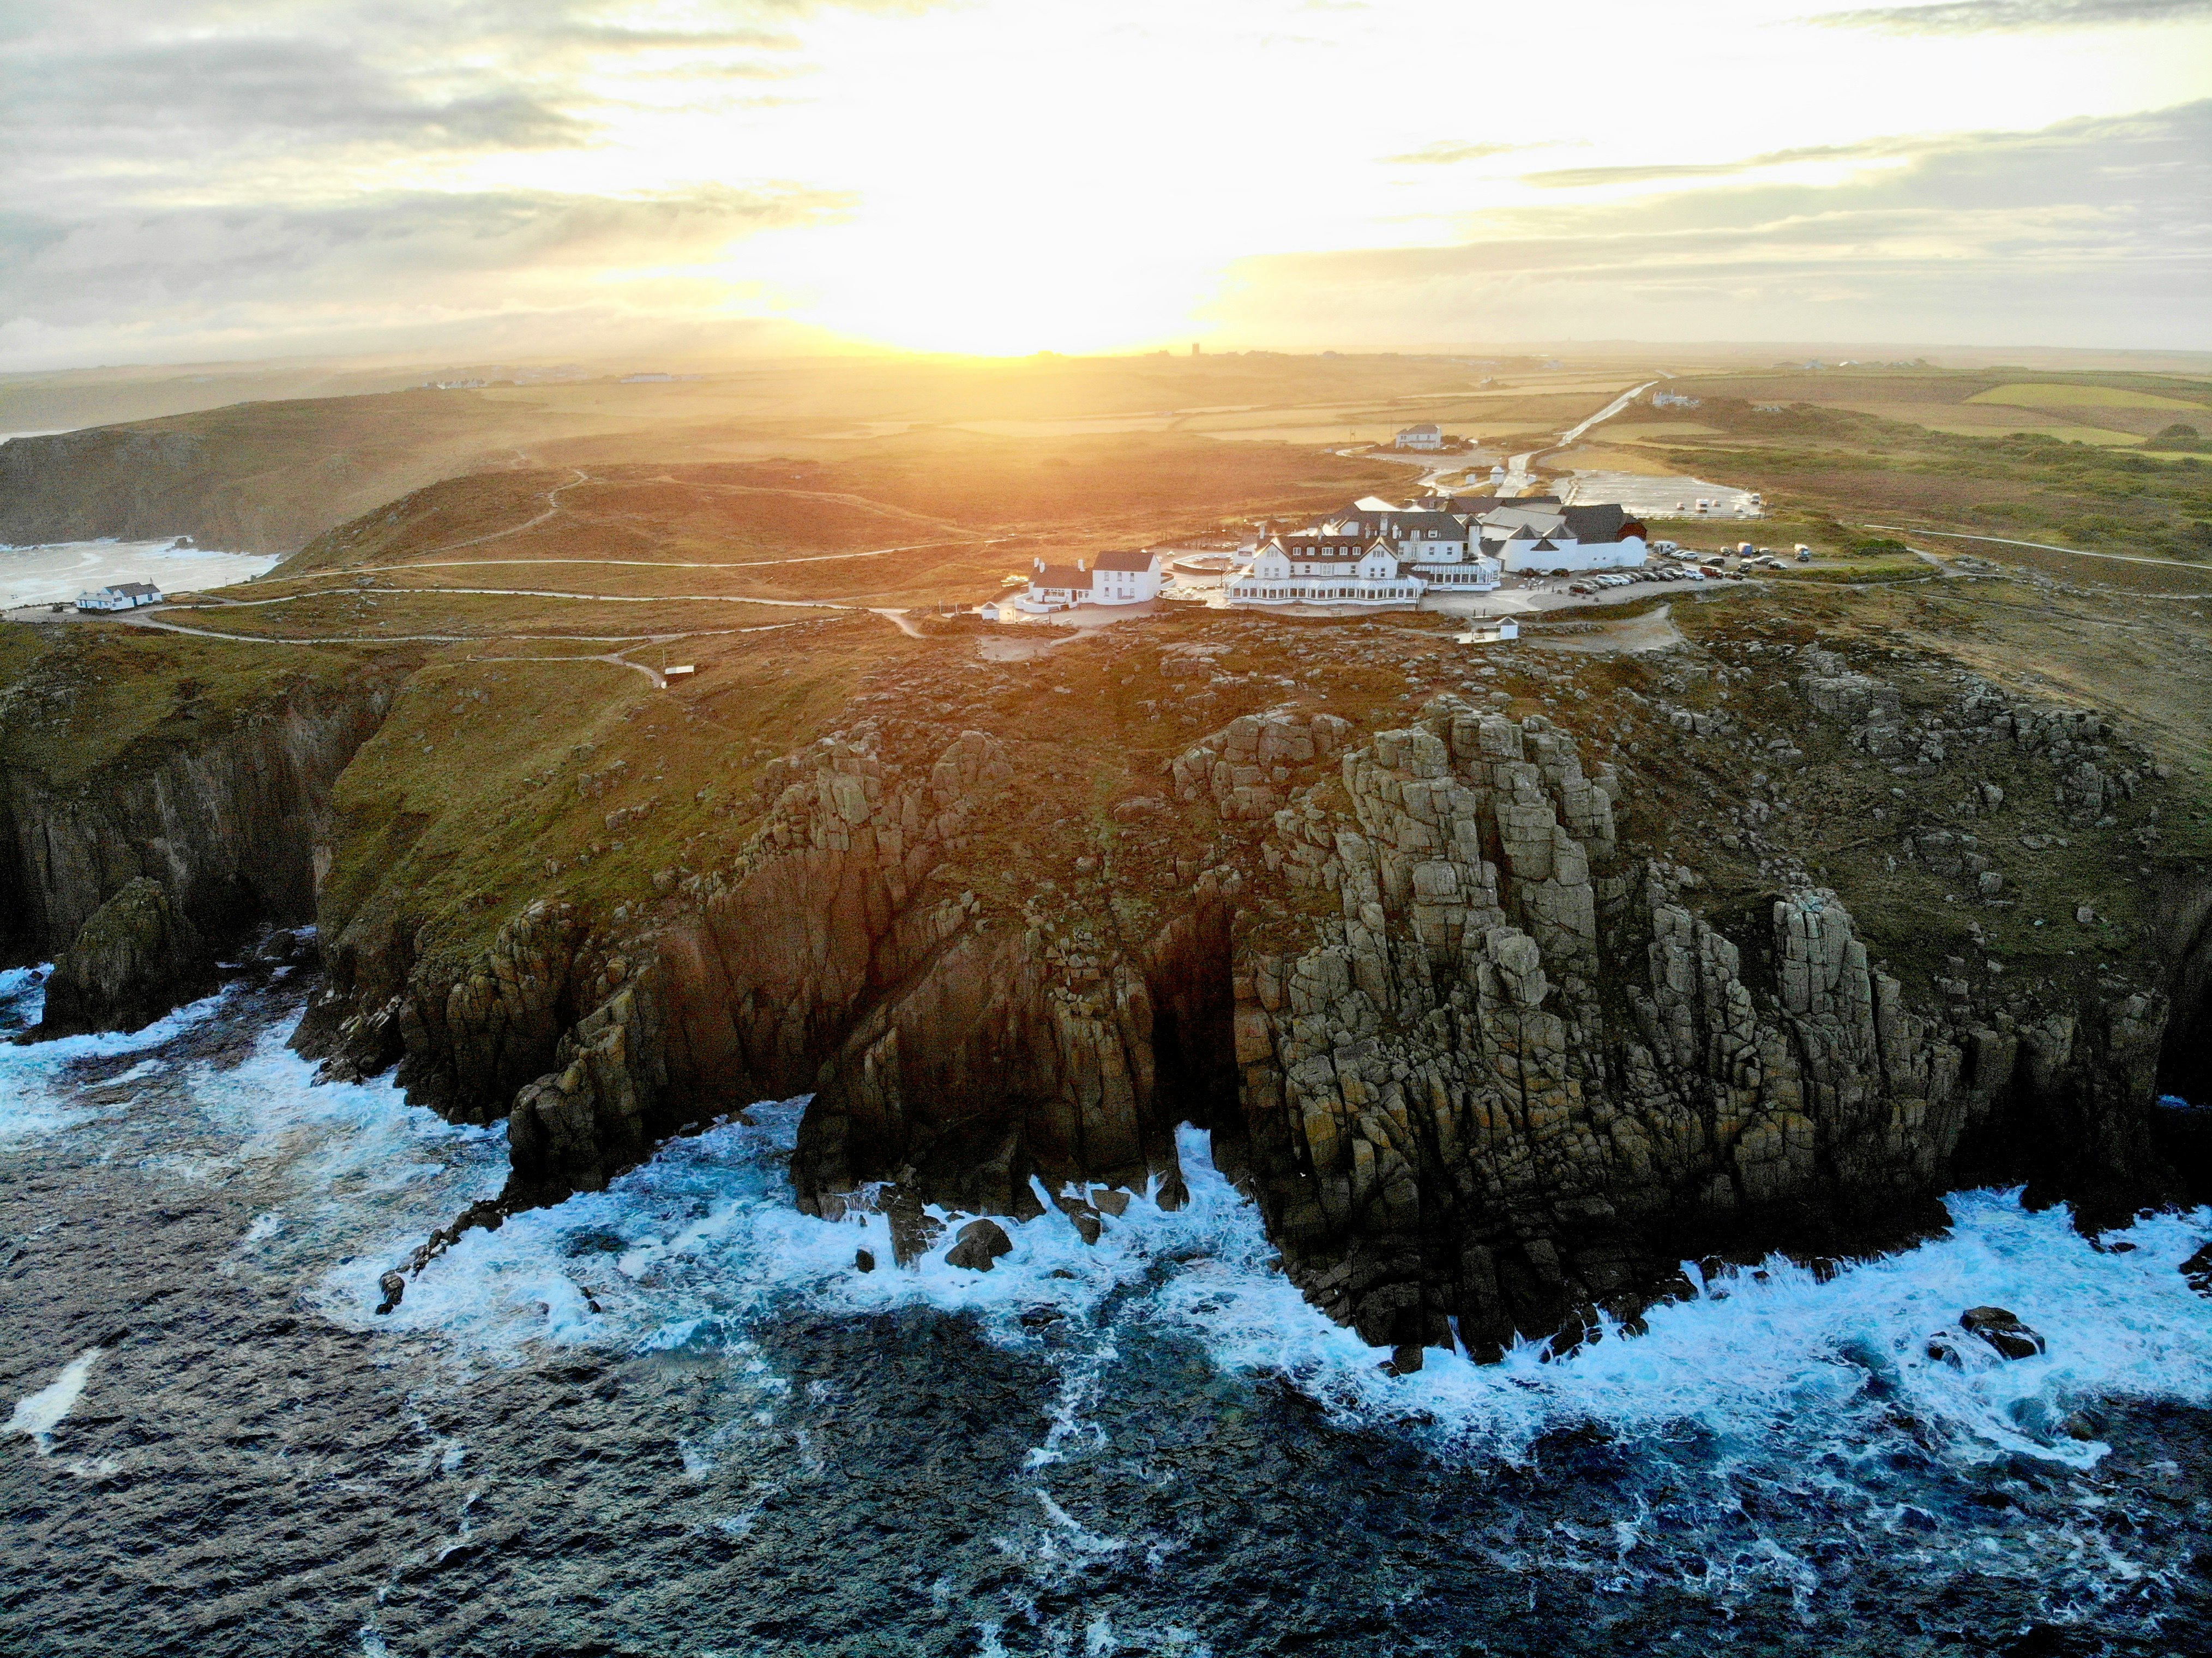 Dawn at Lands End, Cornwall.

Help me continue to share images on Unsplash - I need a new camera: www.buymeacoffee.com/benjaminelliott 